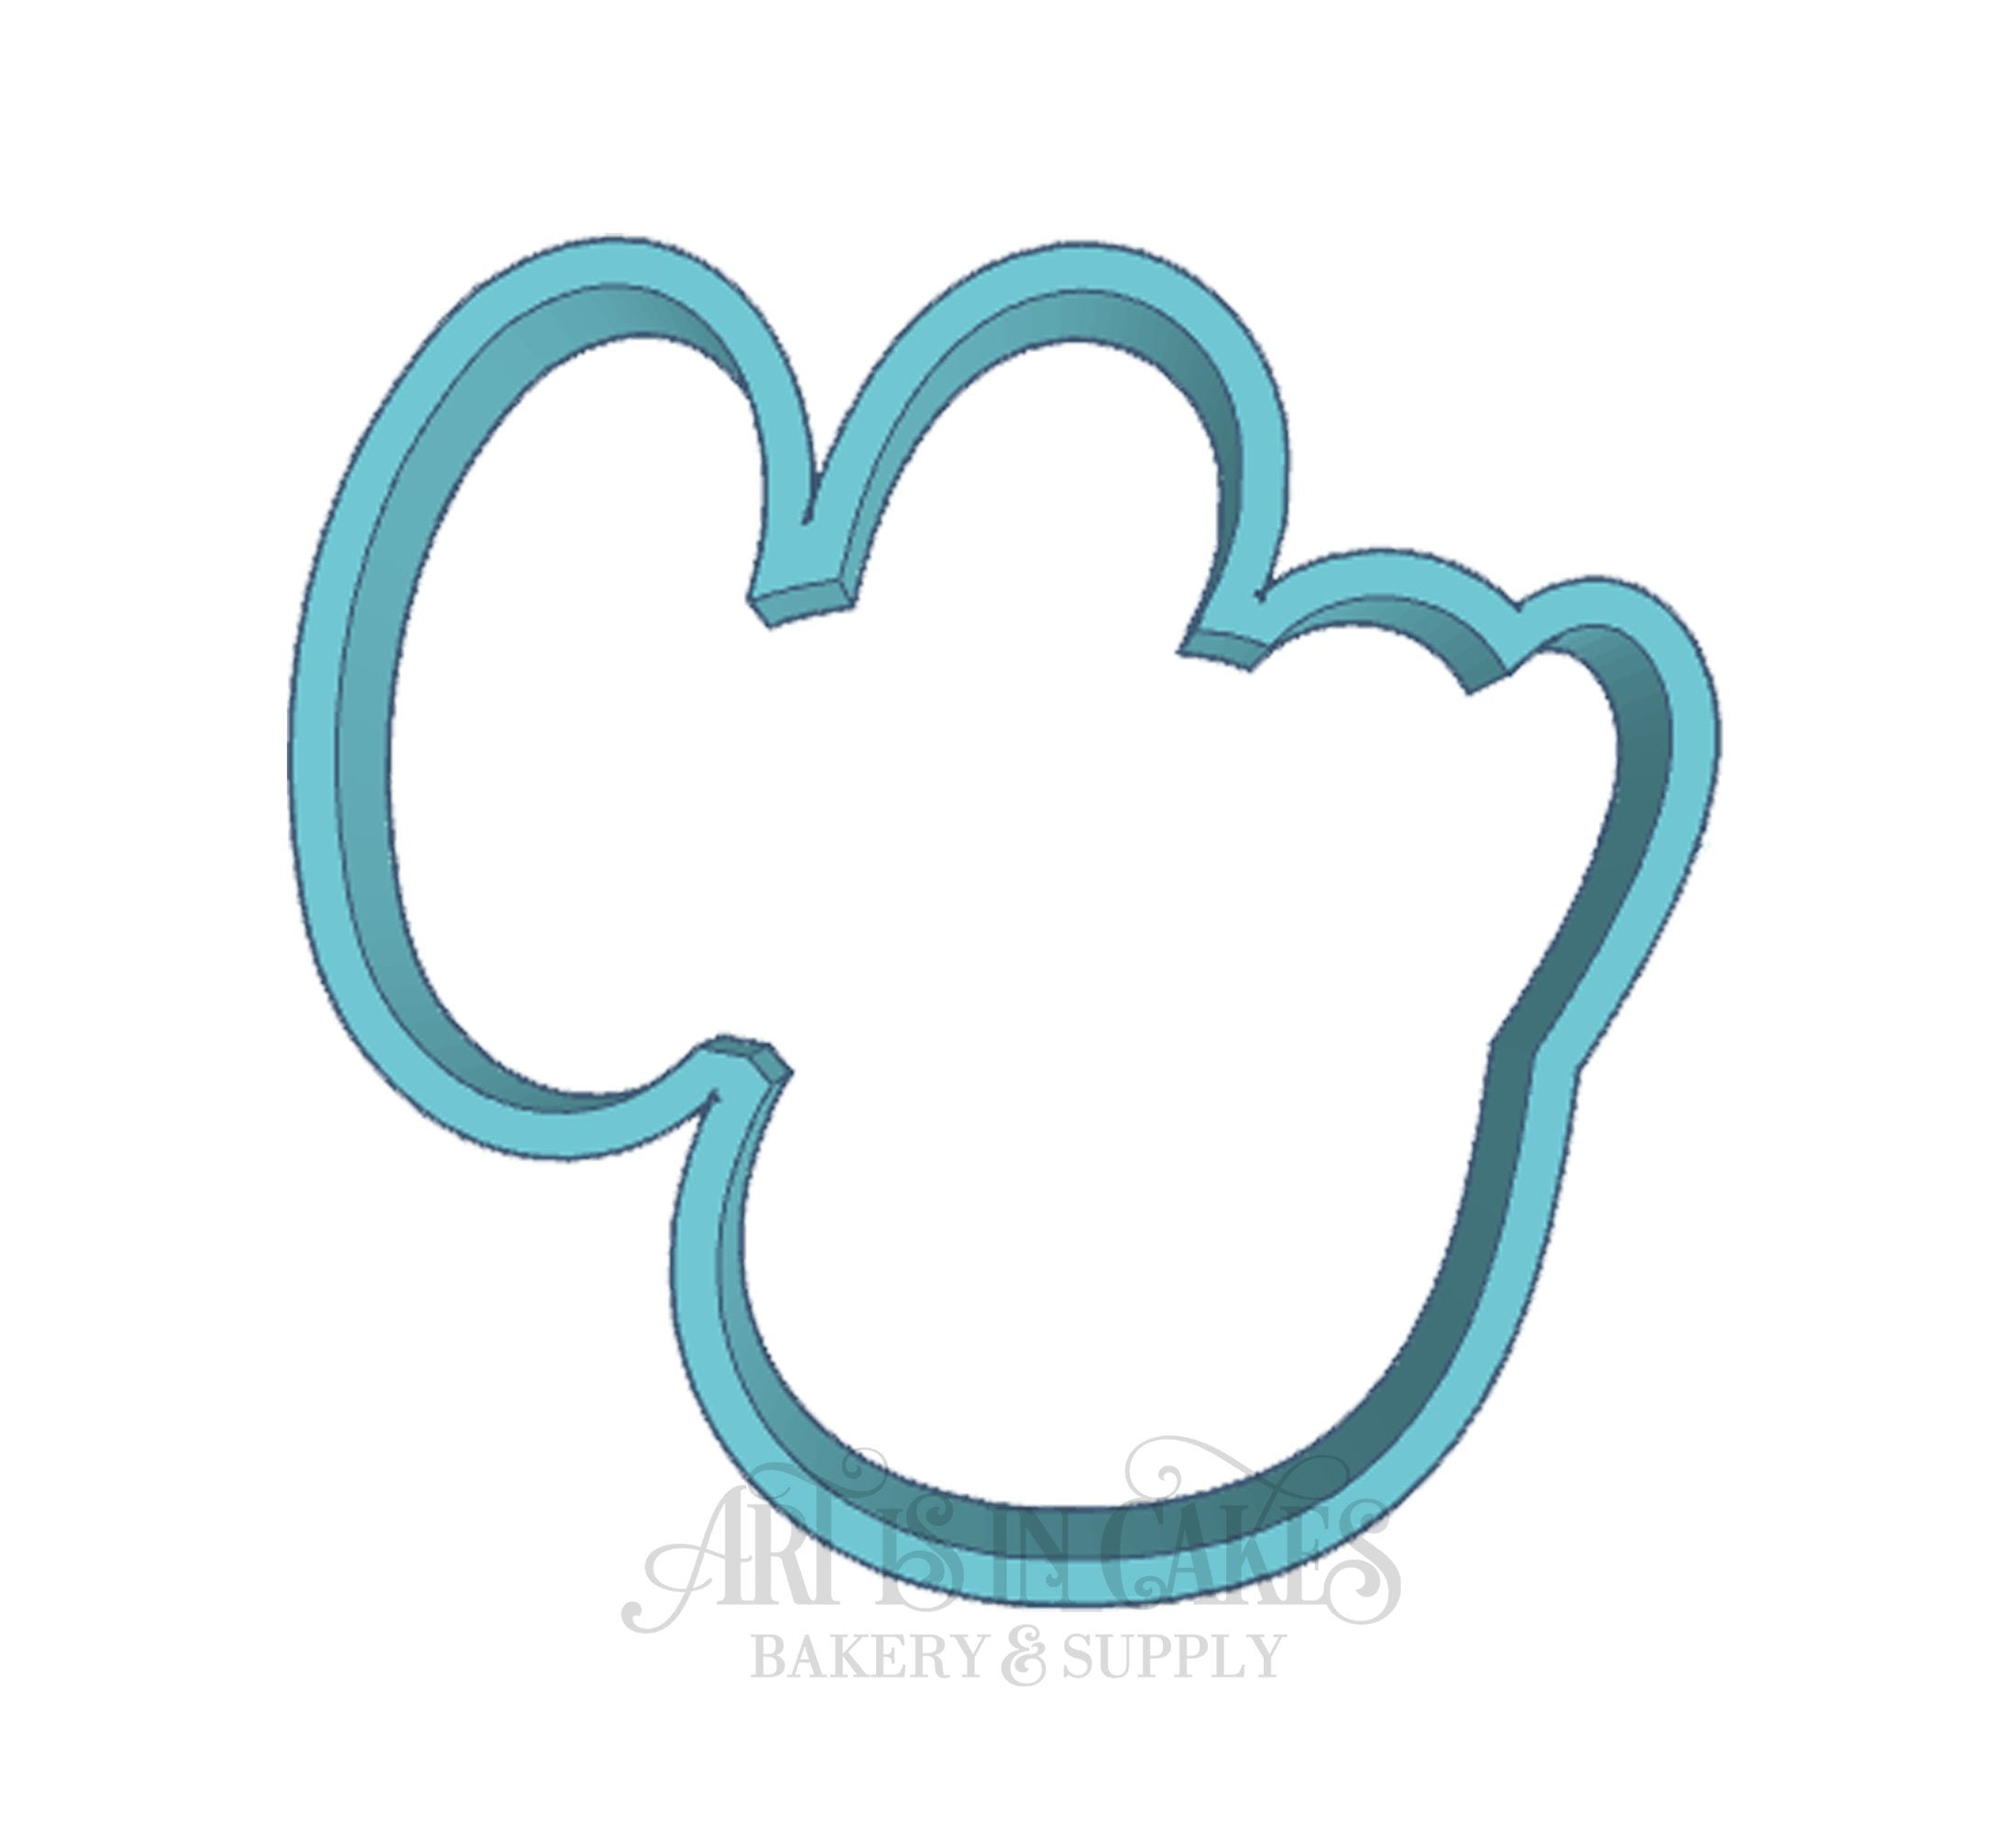 Cursive One Lettered Number Cookie Cutter - PLA Plastic 